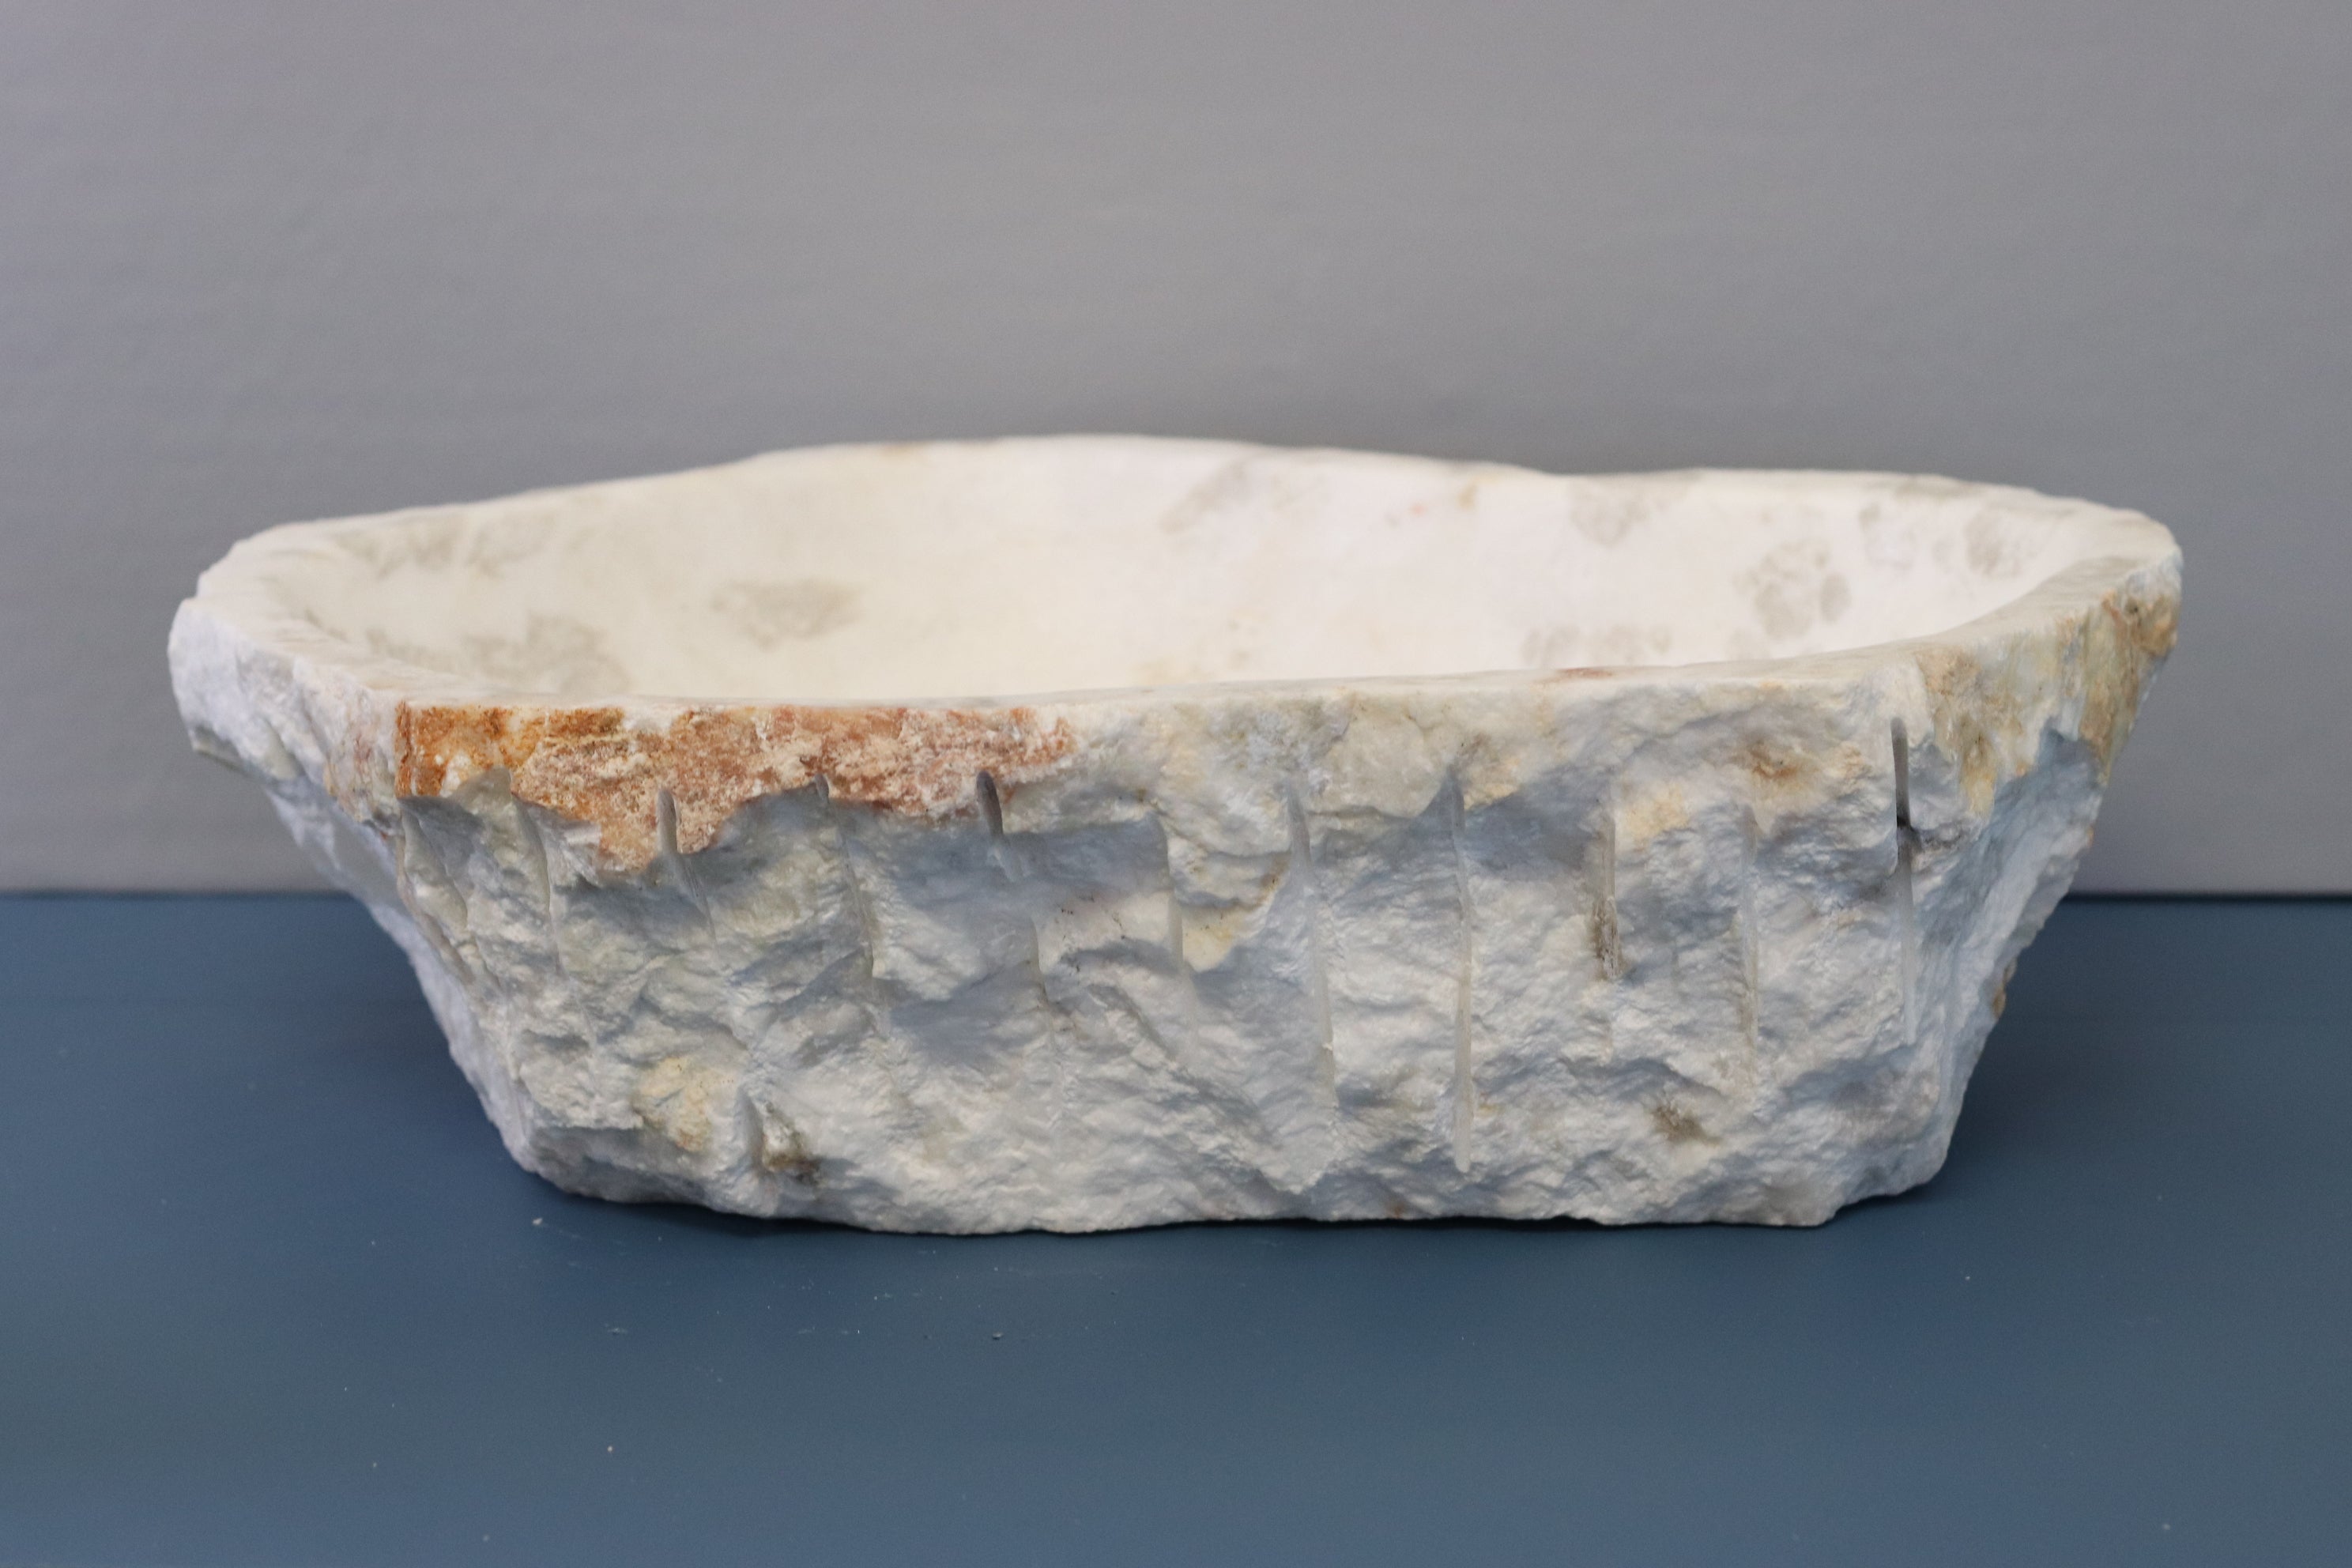 White Grey Onyx Stone  Bathroom Vessel Sink. Epoxy Sealant is available with fast shipping. Standard drain size. A beautiful work of rustic art. Handmade. Buy Now at www.felipeandgrace.com.